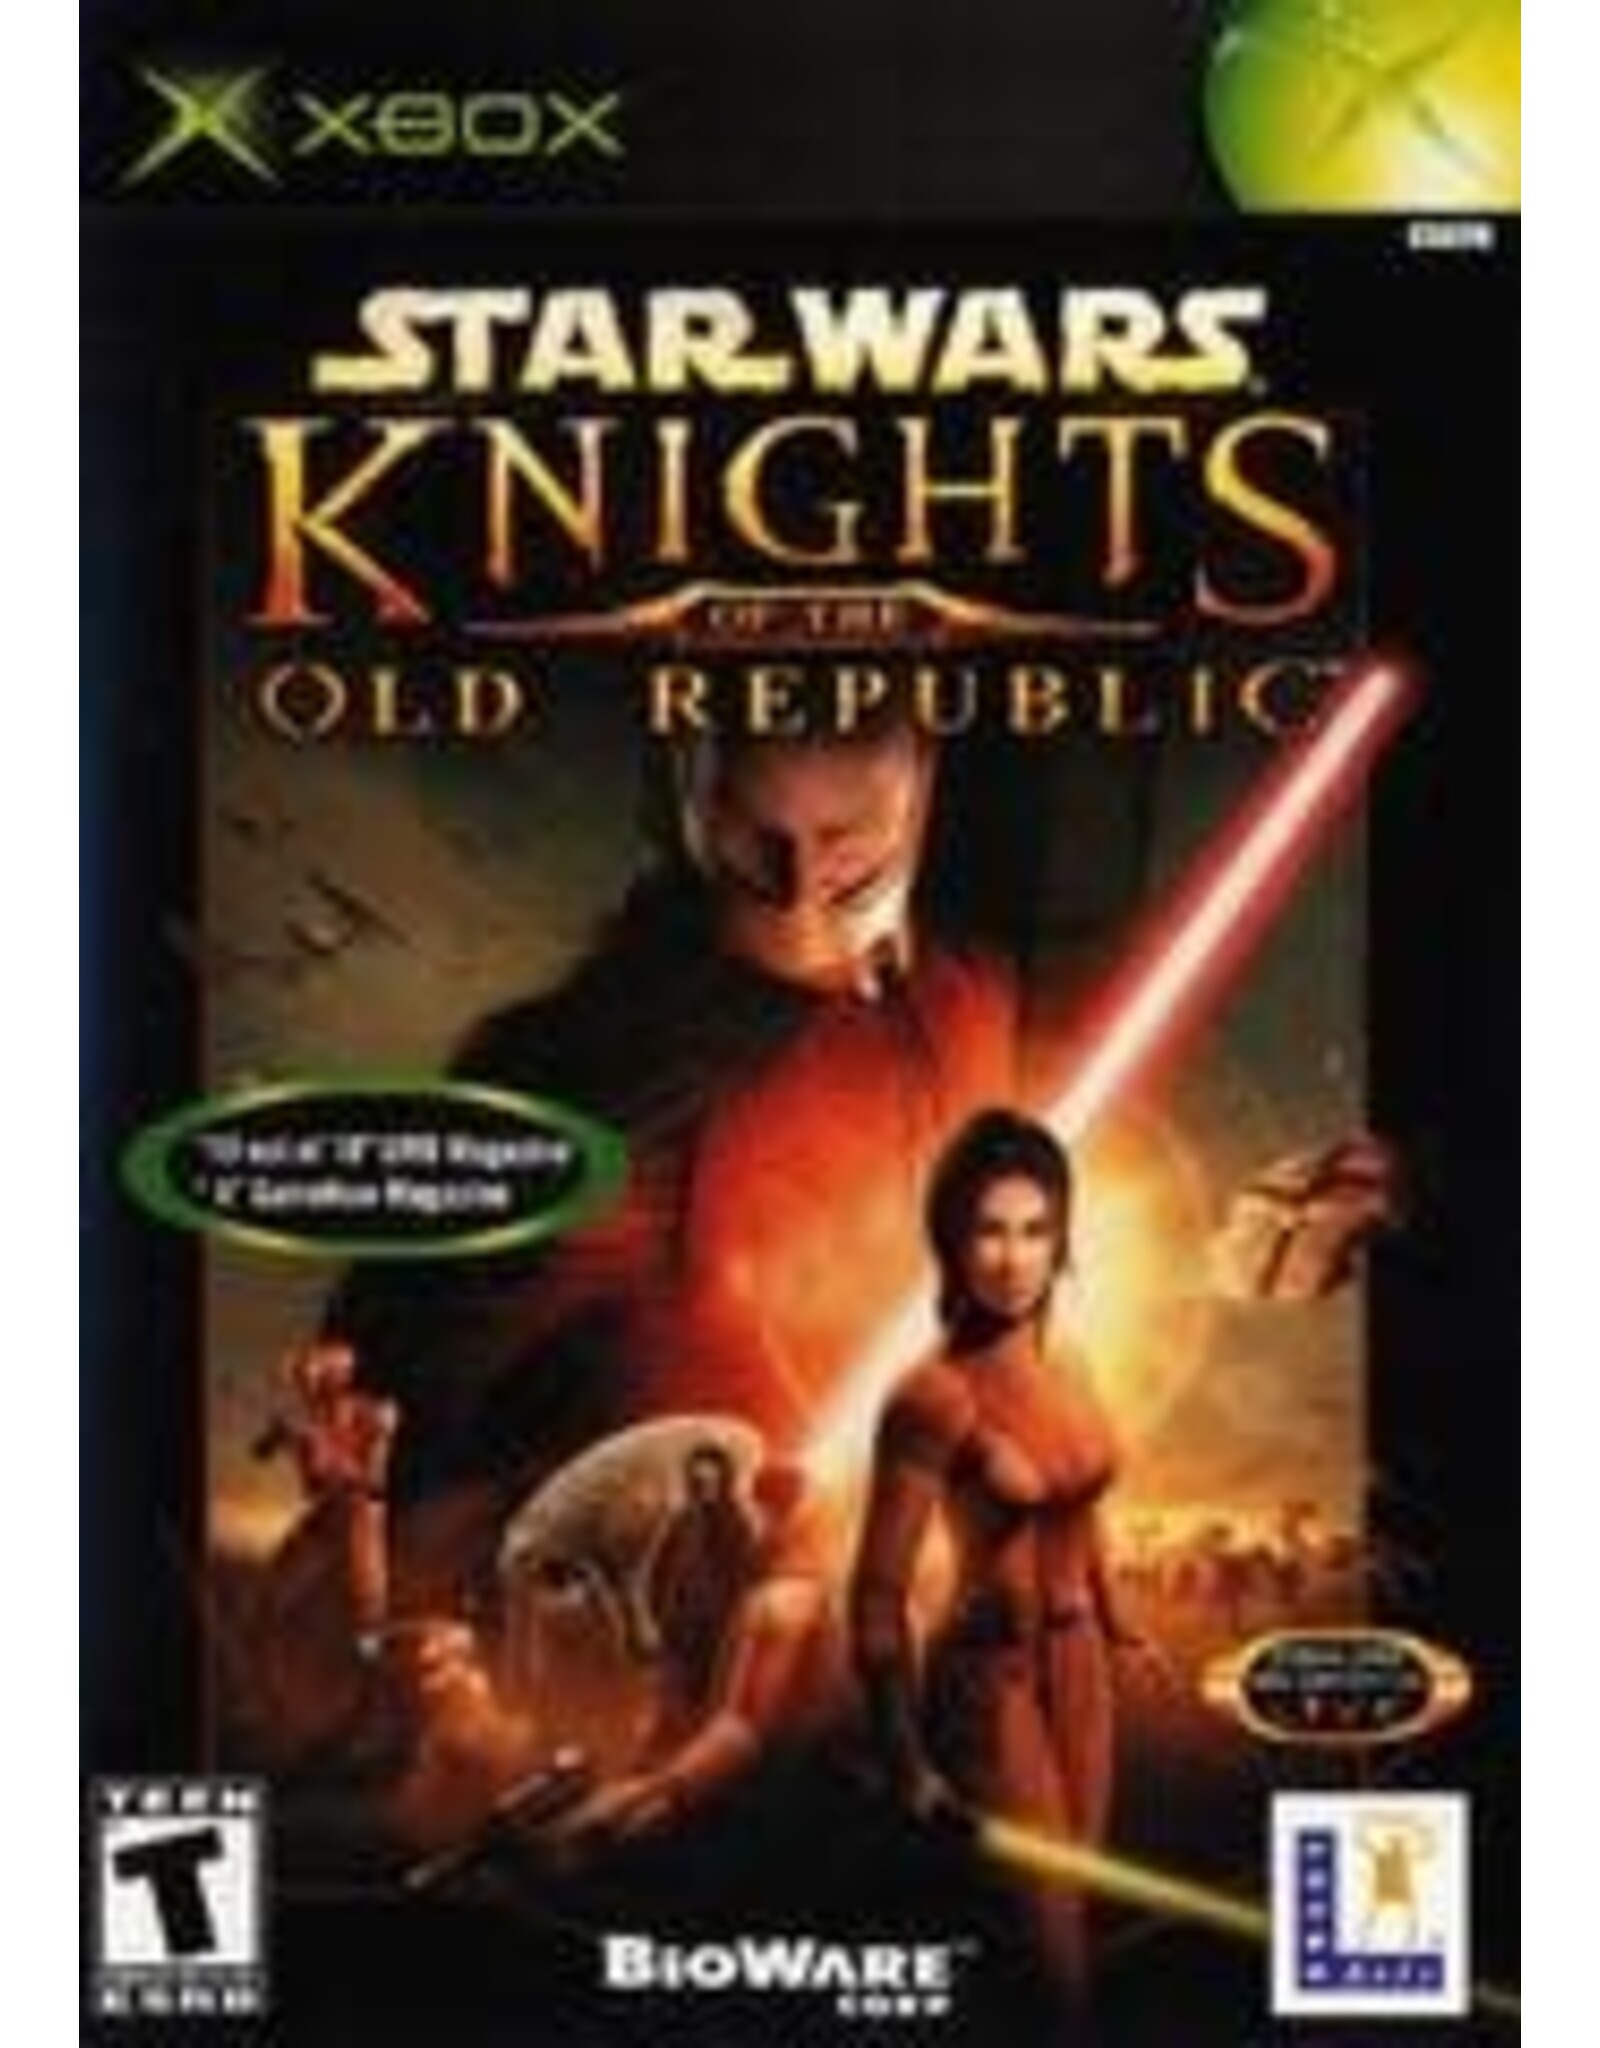 Xbox Star Wars Knights of the Old Republic (Used, Cosmetic Damage)